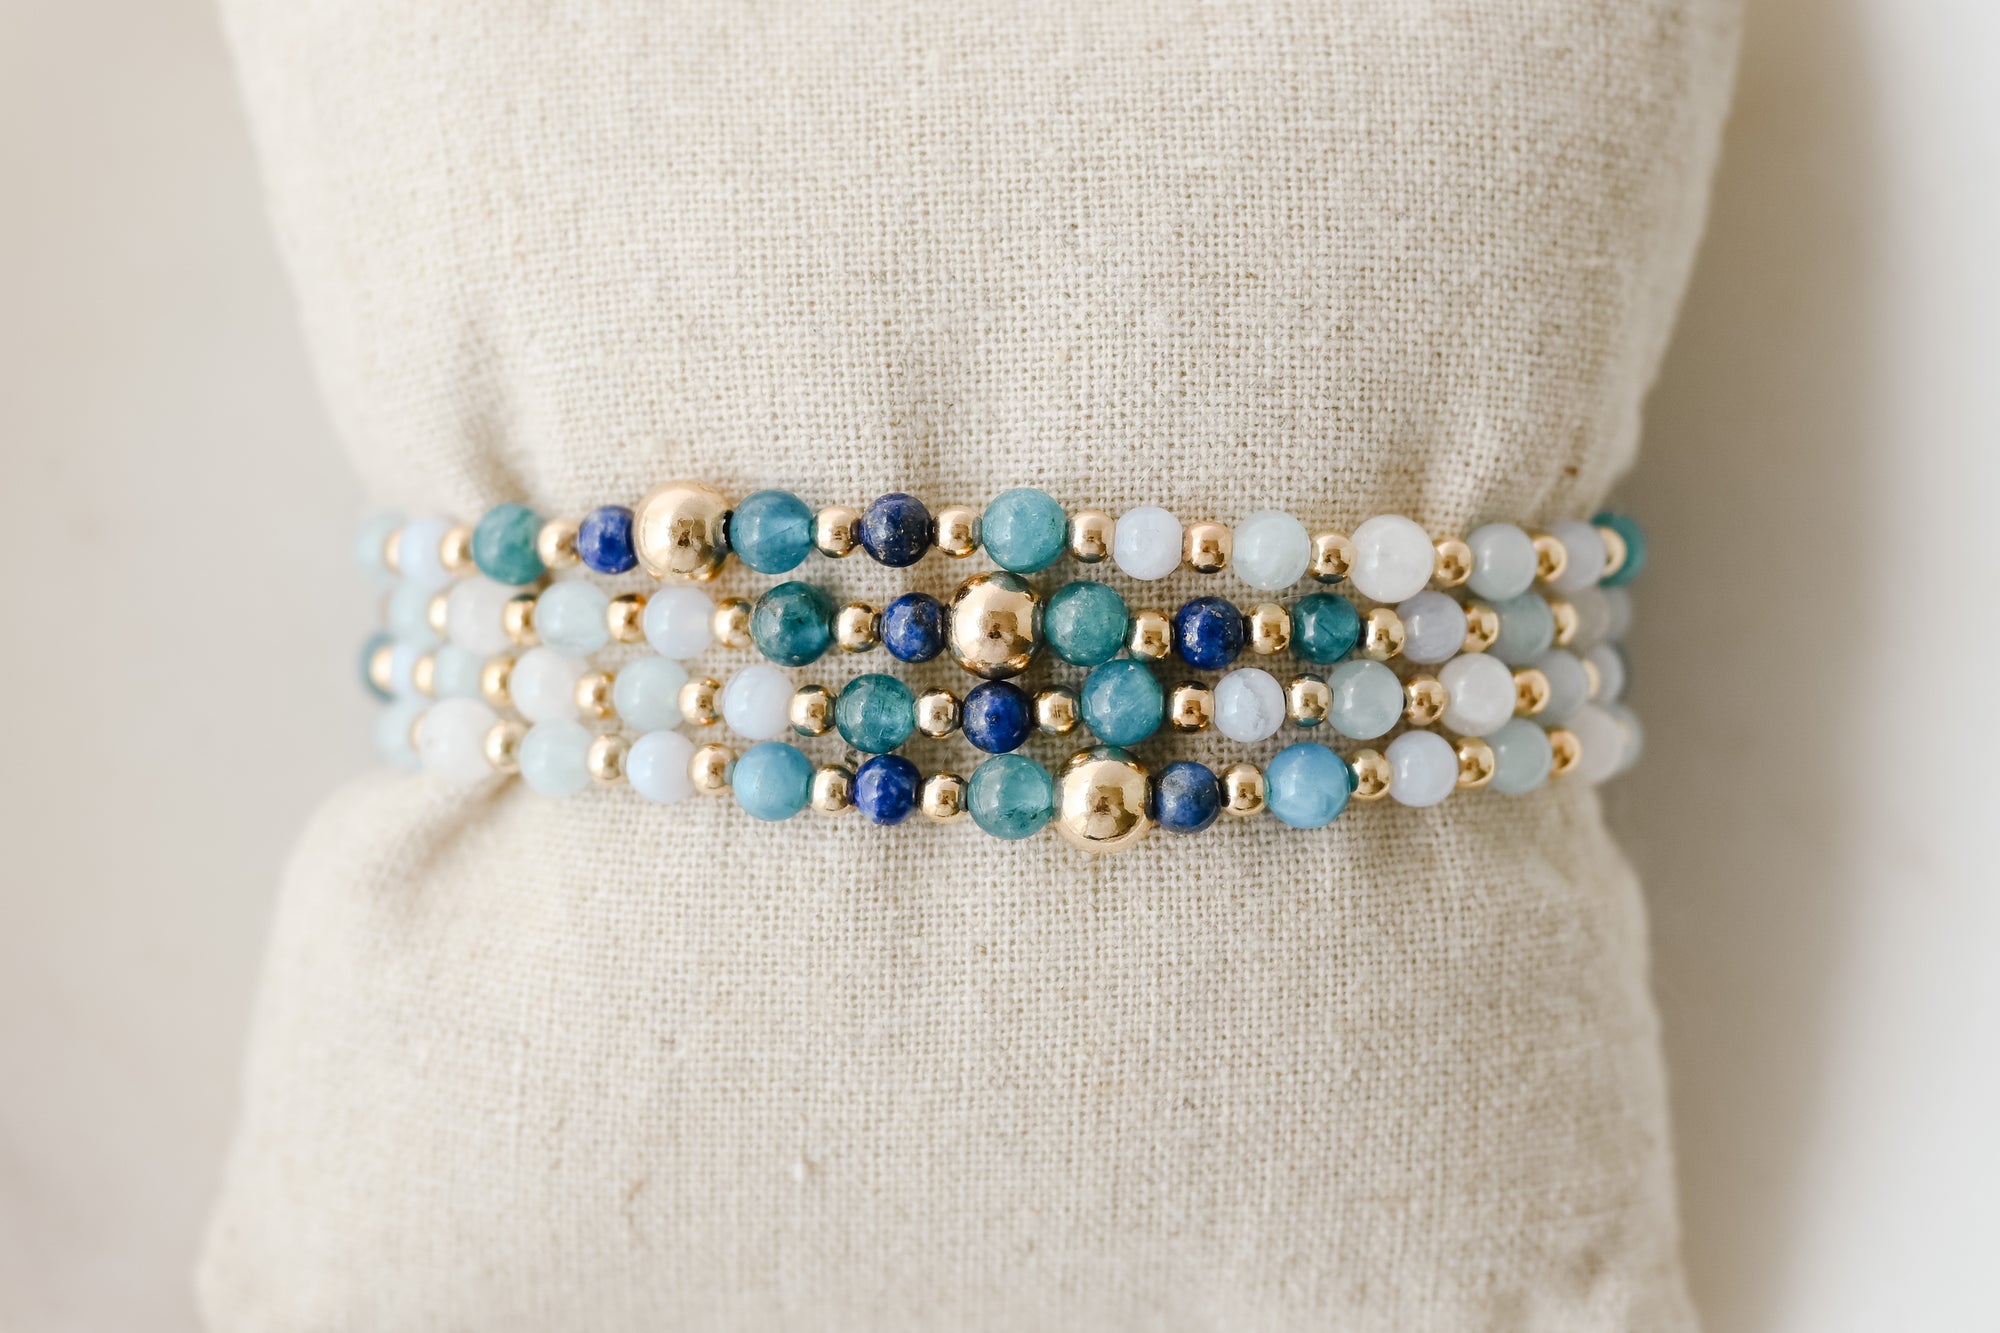 Go With The Flow Luxe Bracelet